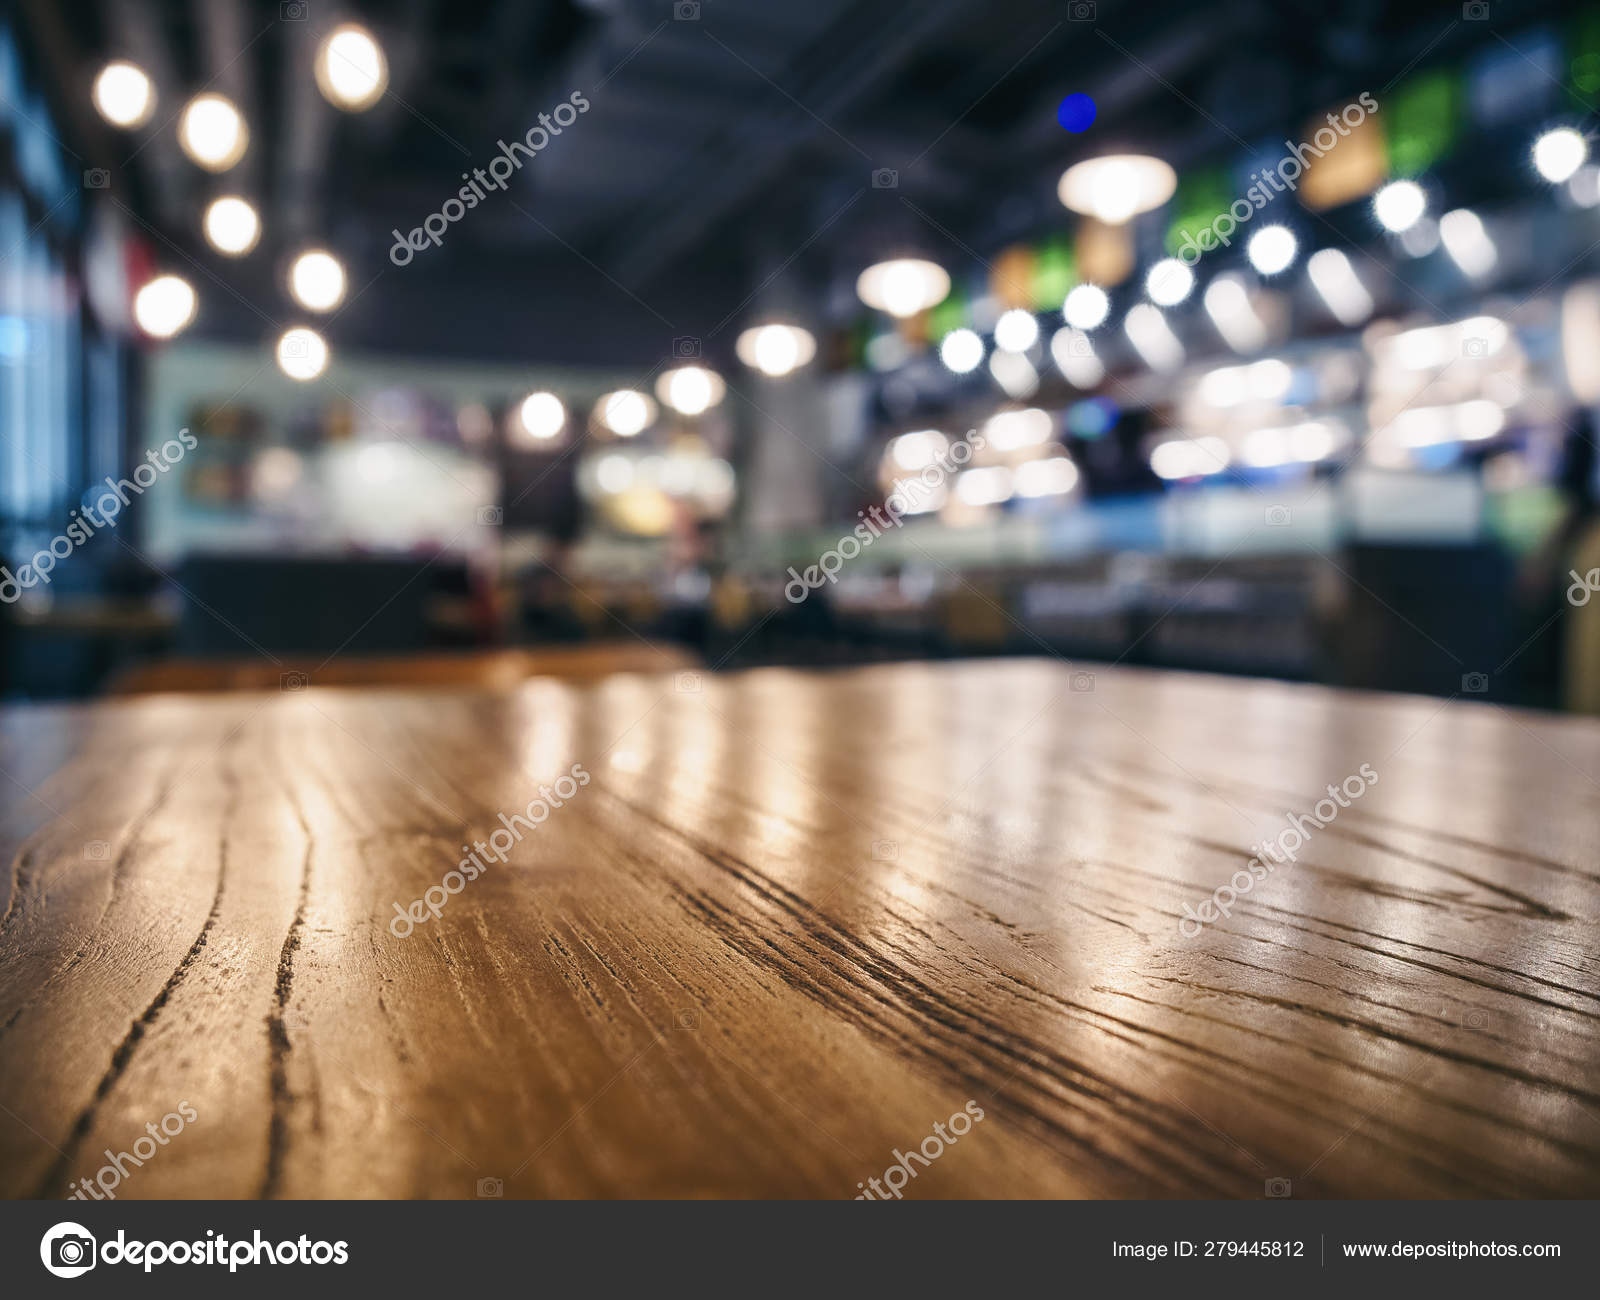 Table top wooden counter Blur Bar cafe restaurant background Stock Photo by  ©viteethumb 279445812